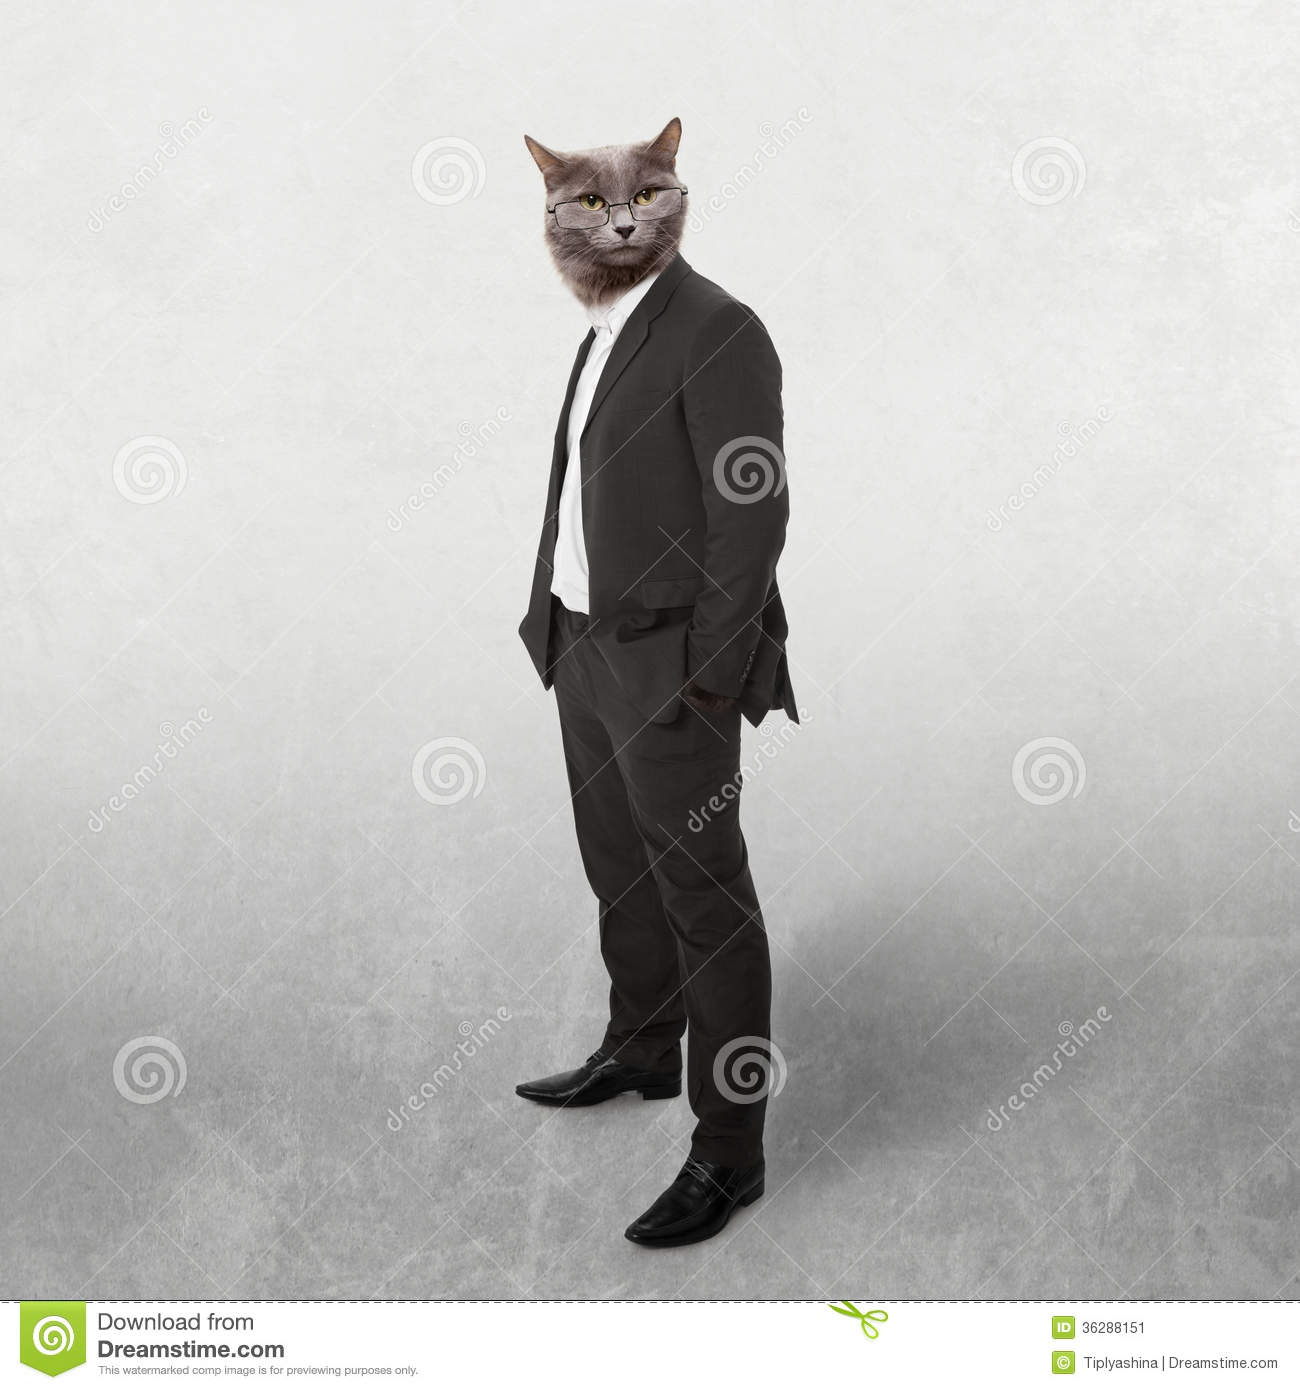 Funny Fluffy Cat In A Business Suit Businessman  Collage On A Grey